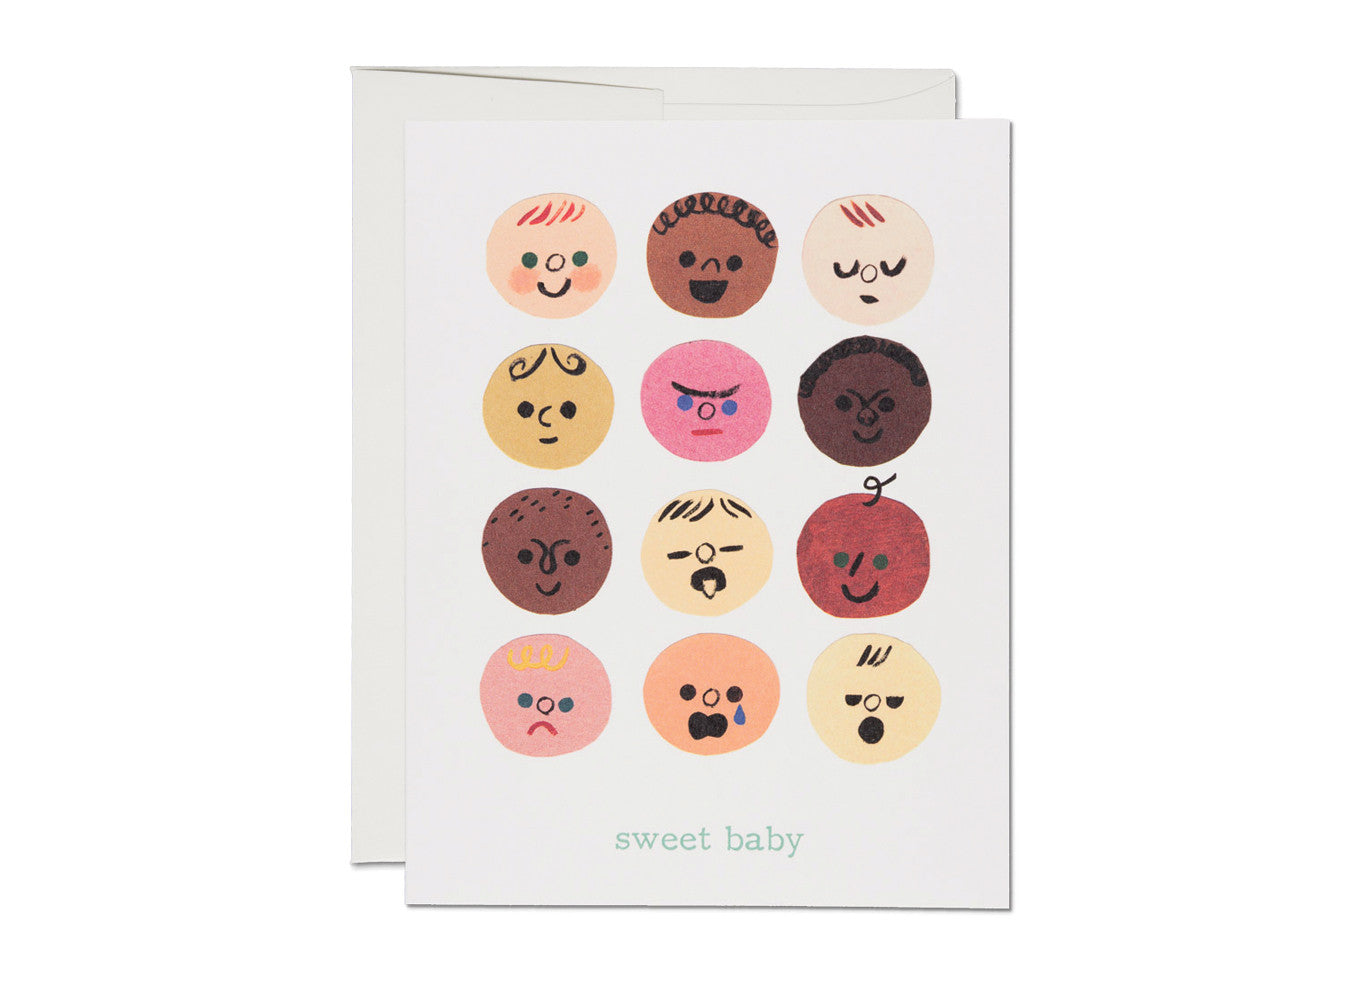 Sweet Baby Faces Card